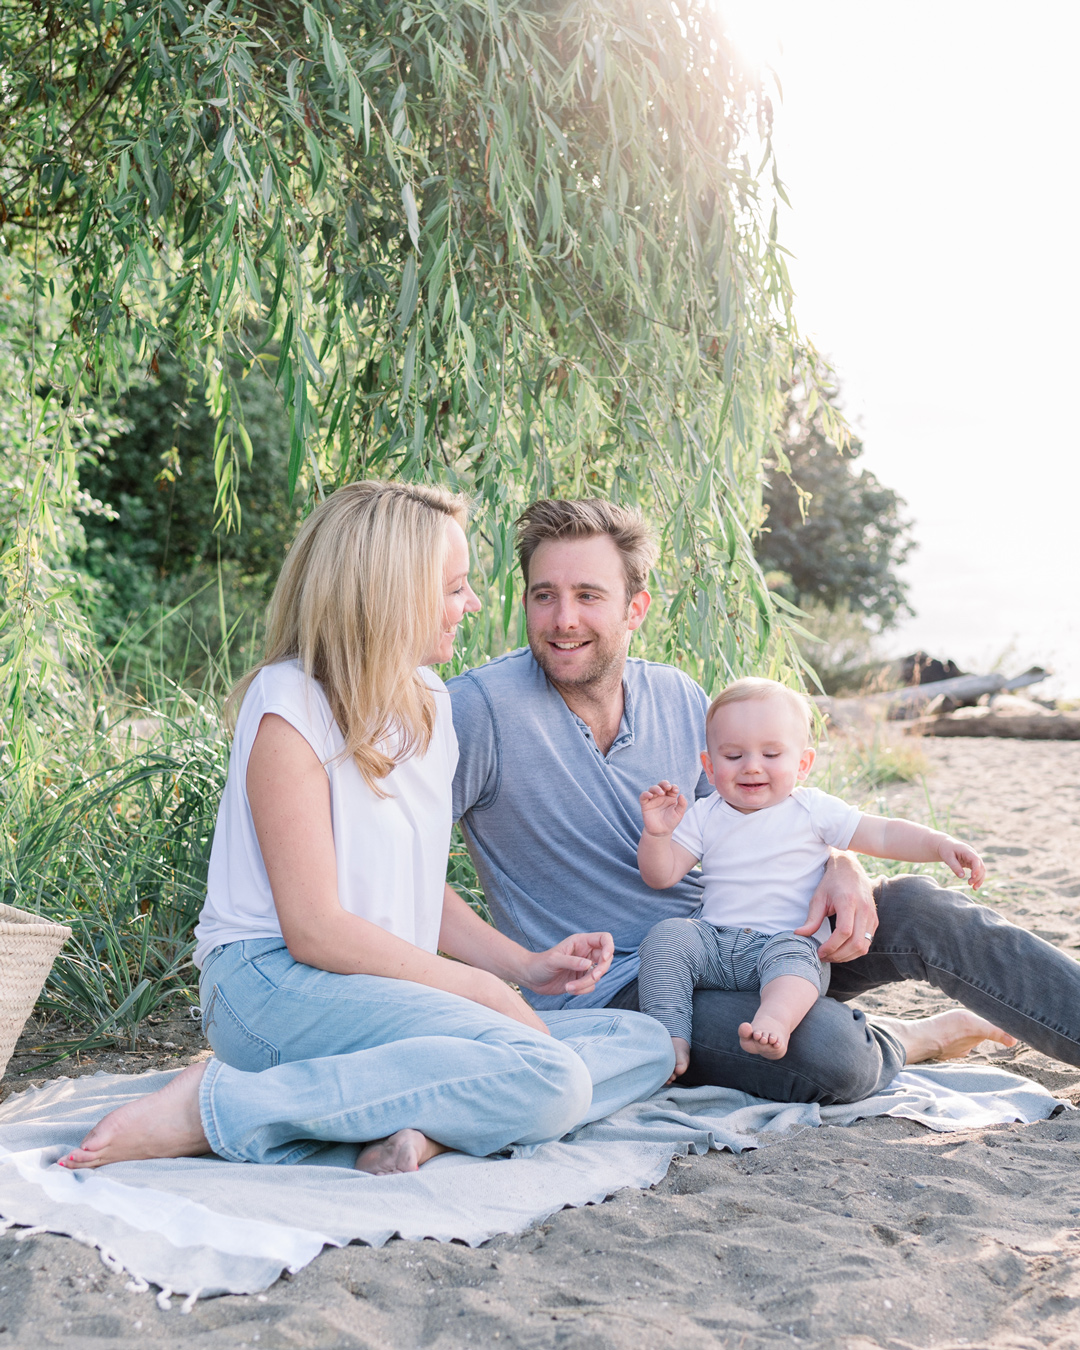 Candid family photos of Vancouver family on Kits beach